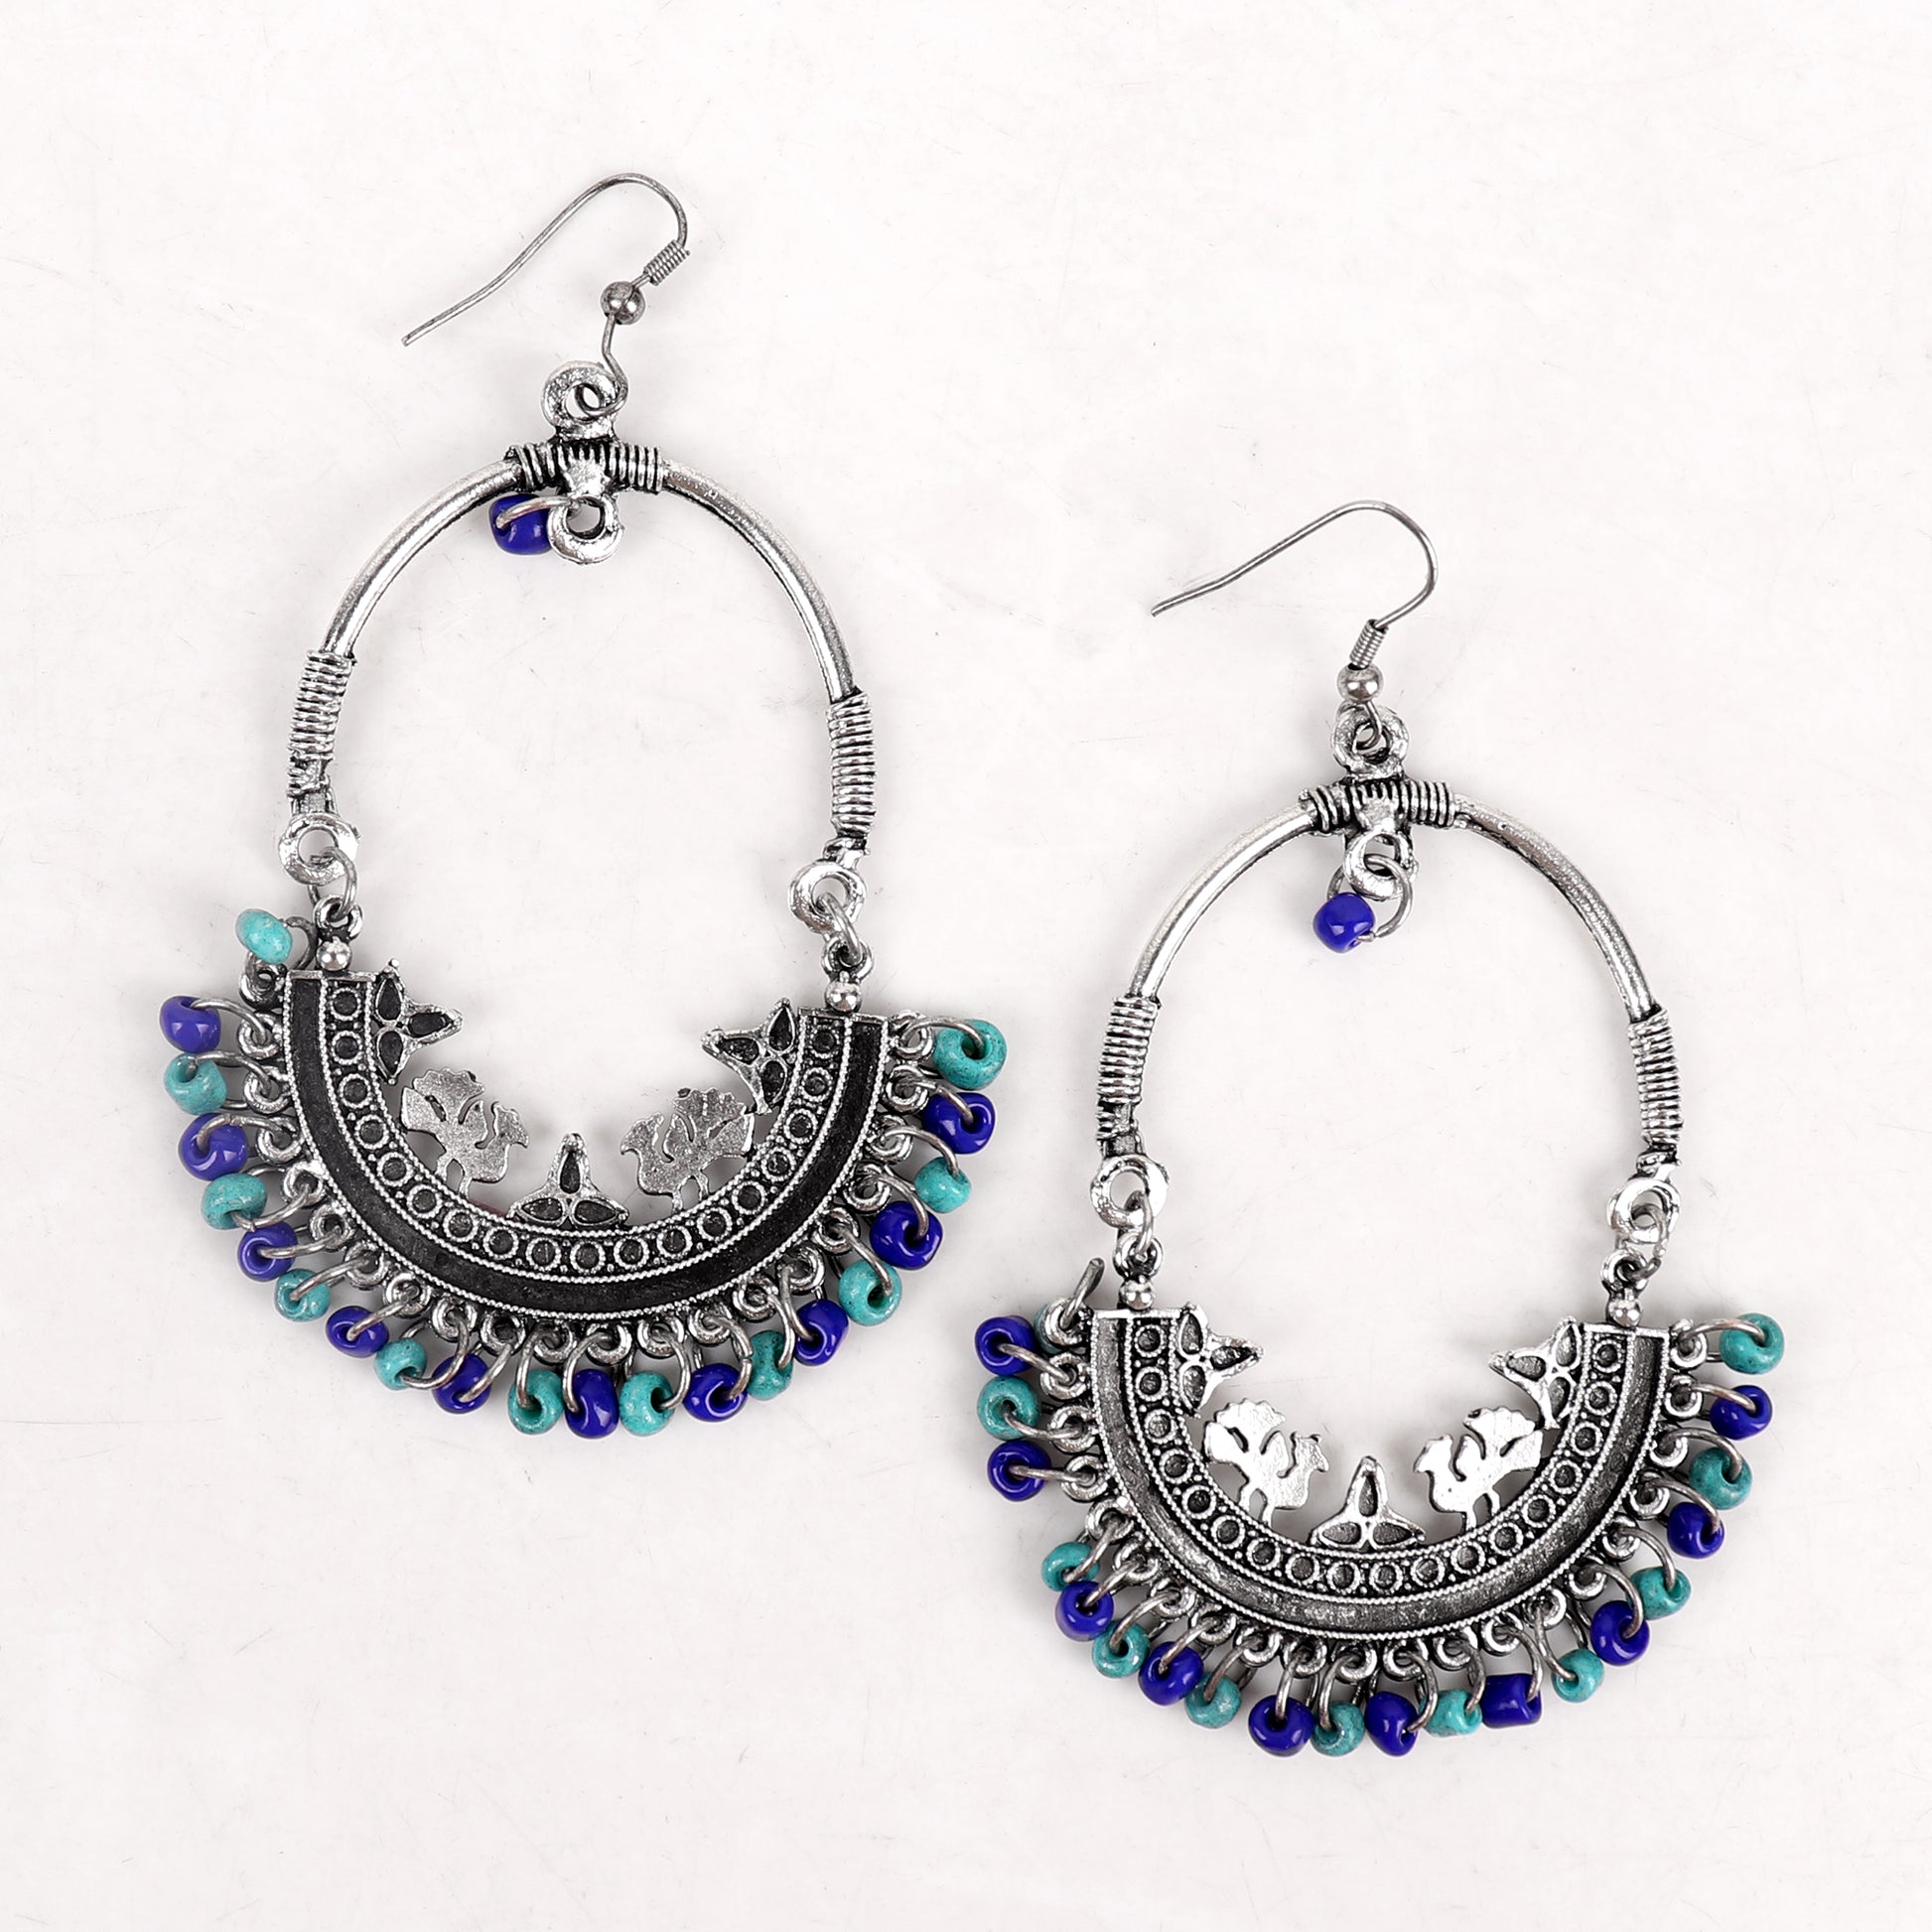 Earrings,Afghan Inspiration Baali with blue & indigo beads - Cippele Multi Store